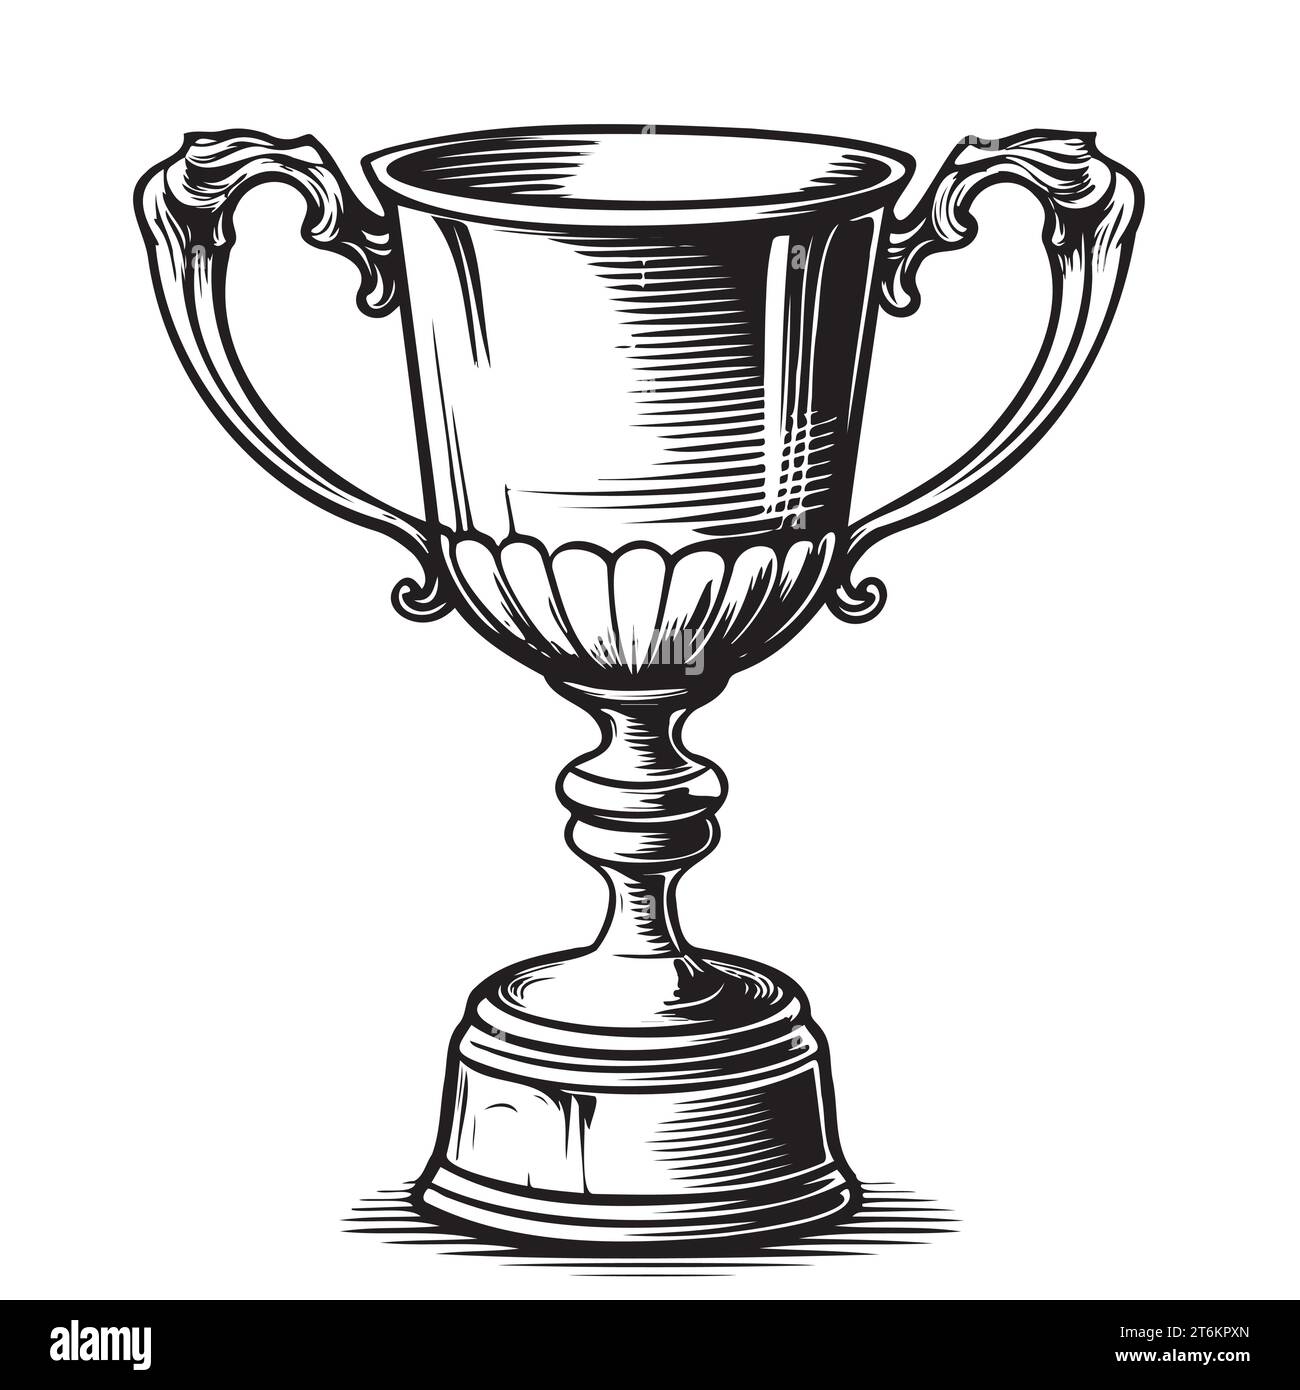 Sport trophy sketch doodle. Hand drawn winners prize on chalkboard background.Vector Stock Vector